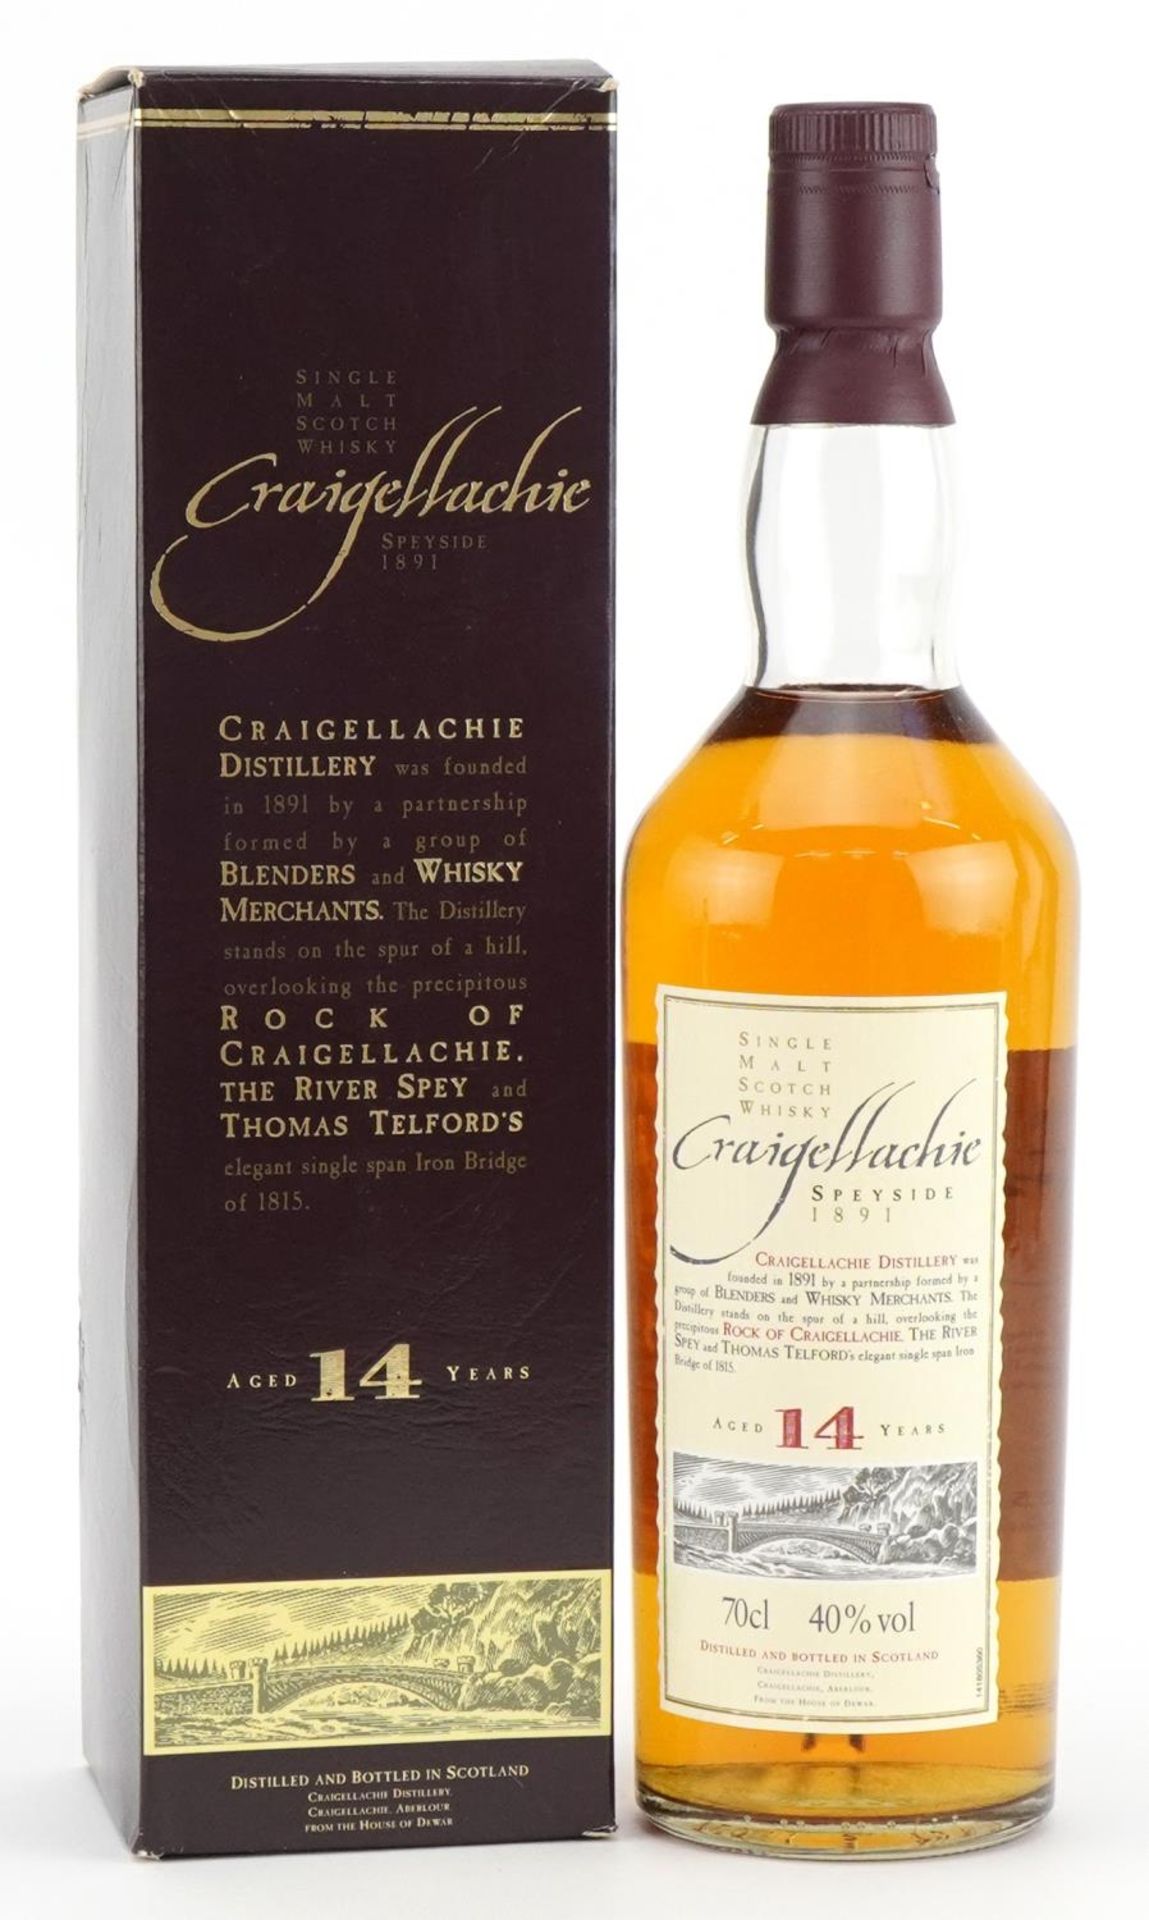 Bottle of Craigellachie Speyside Single Malt whisky with box and aged 14 years : For further